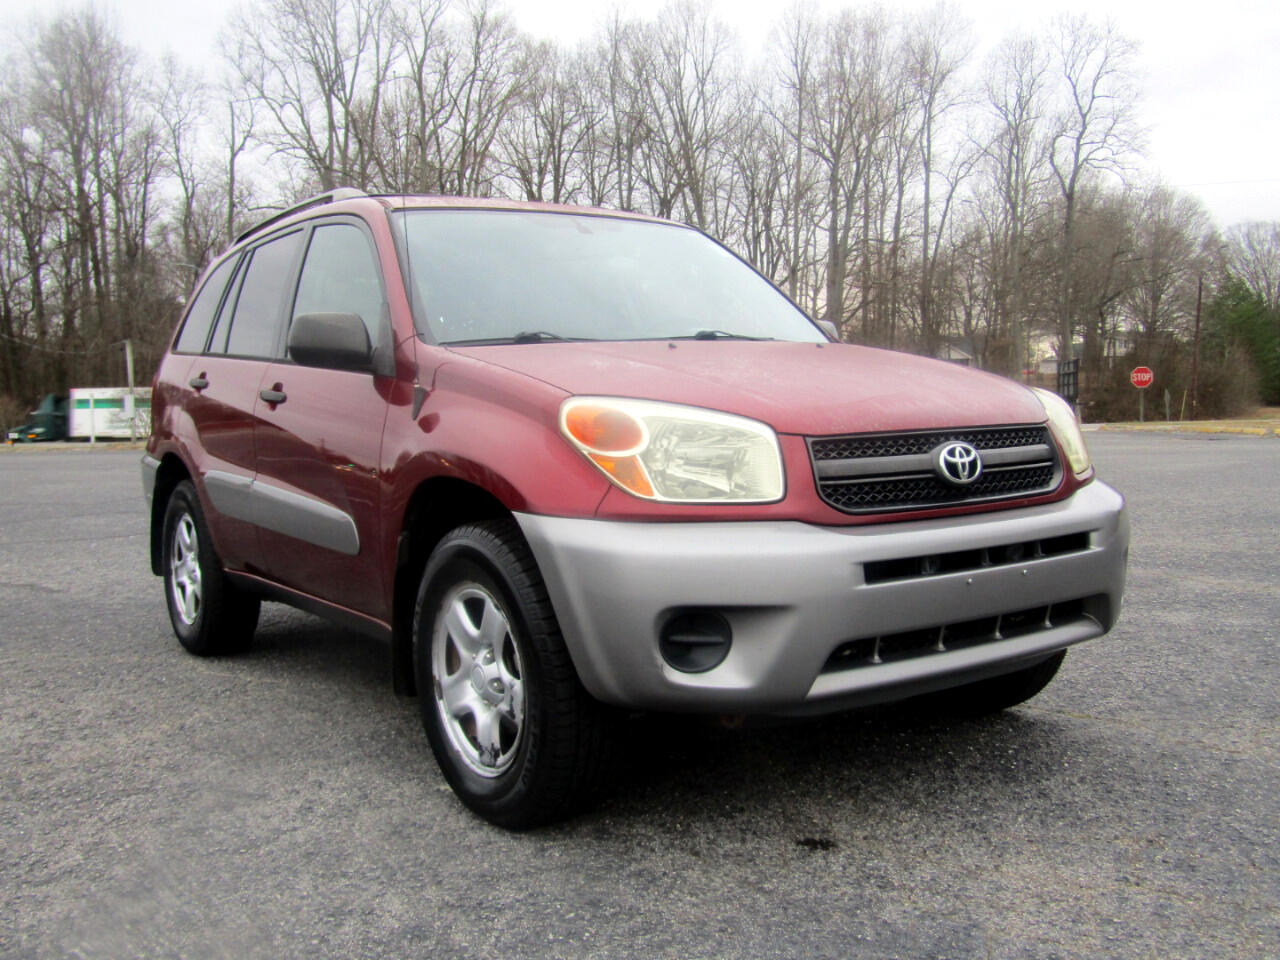 Used 2004 Toyota RAV4 4WD for Sale in Concord NC 28027 A and J Used